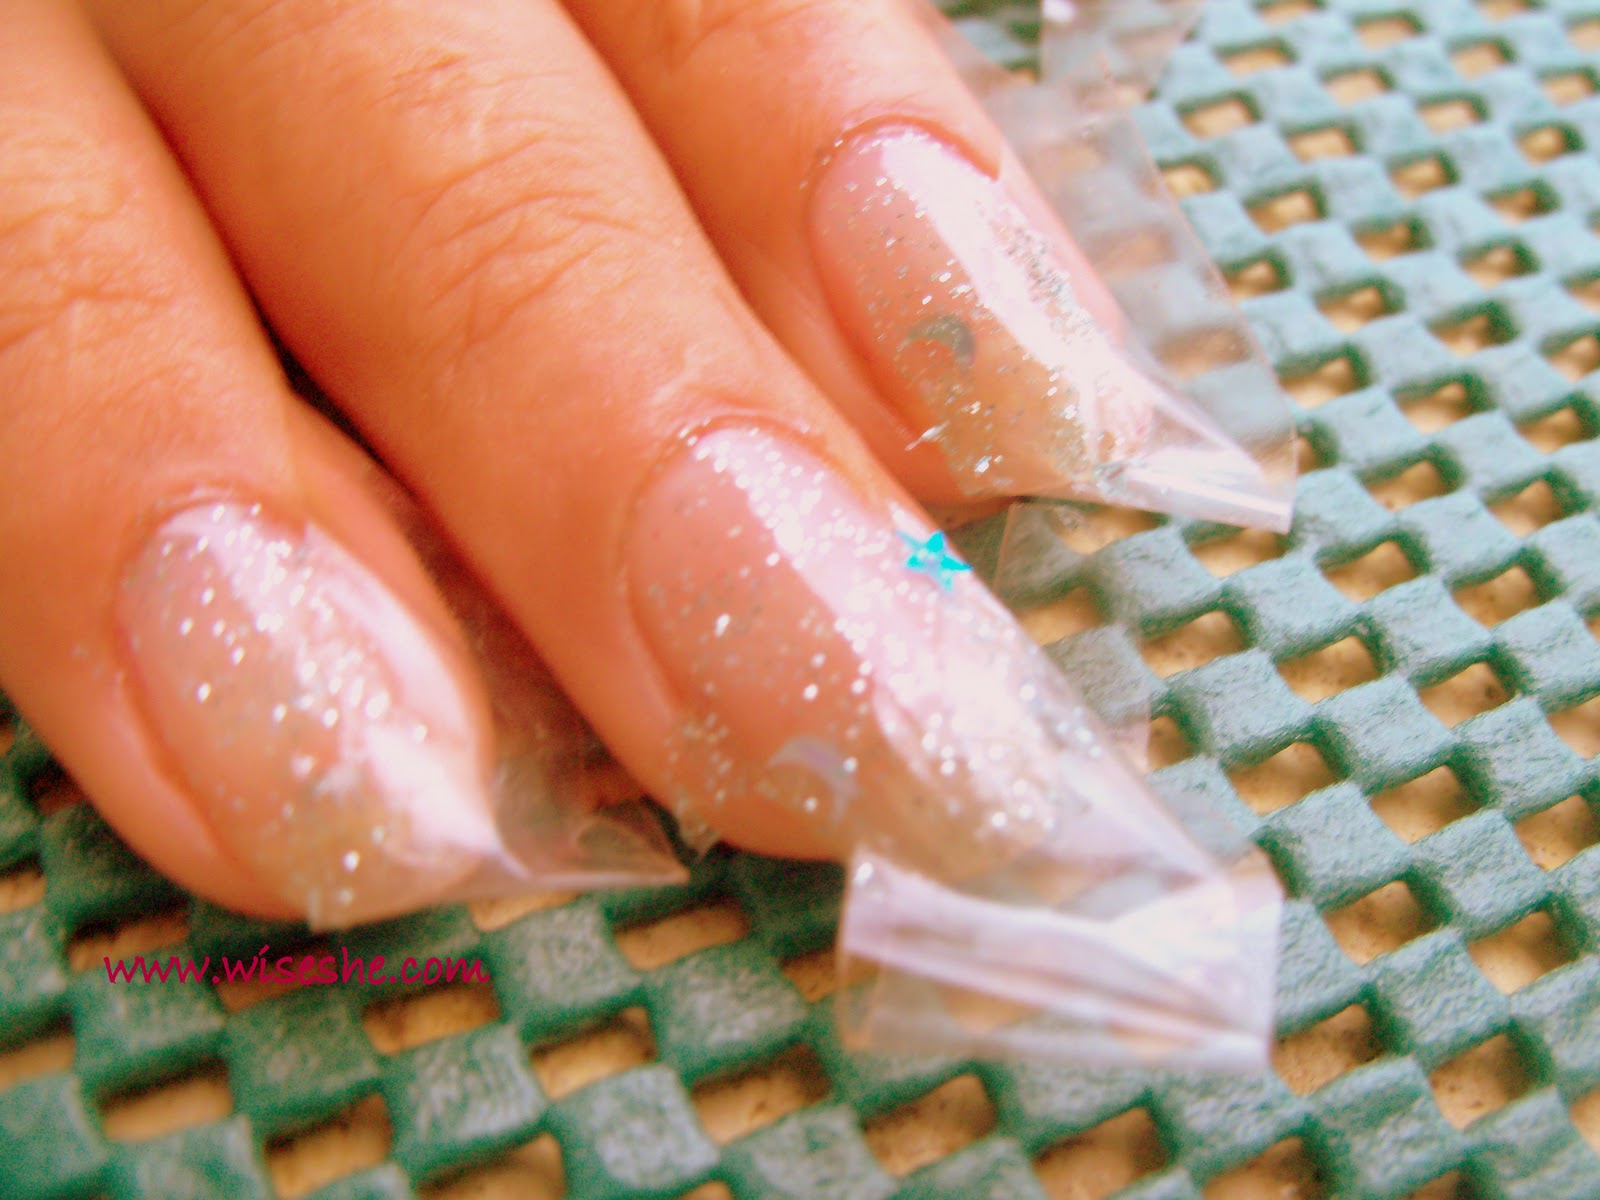 4. "Trendy Nail Designs Using Painters Tape" - wide 8